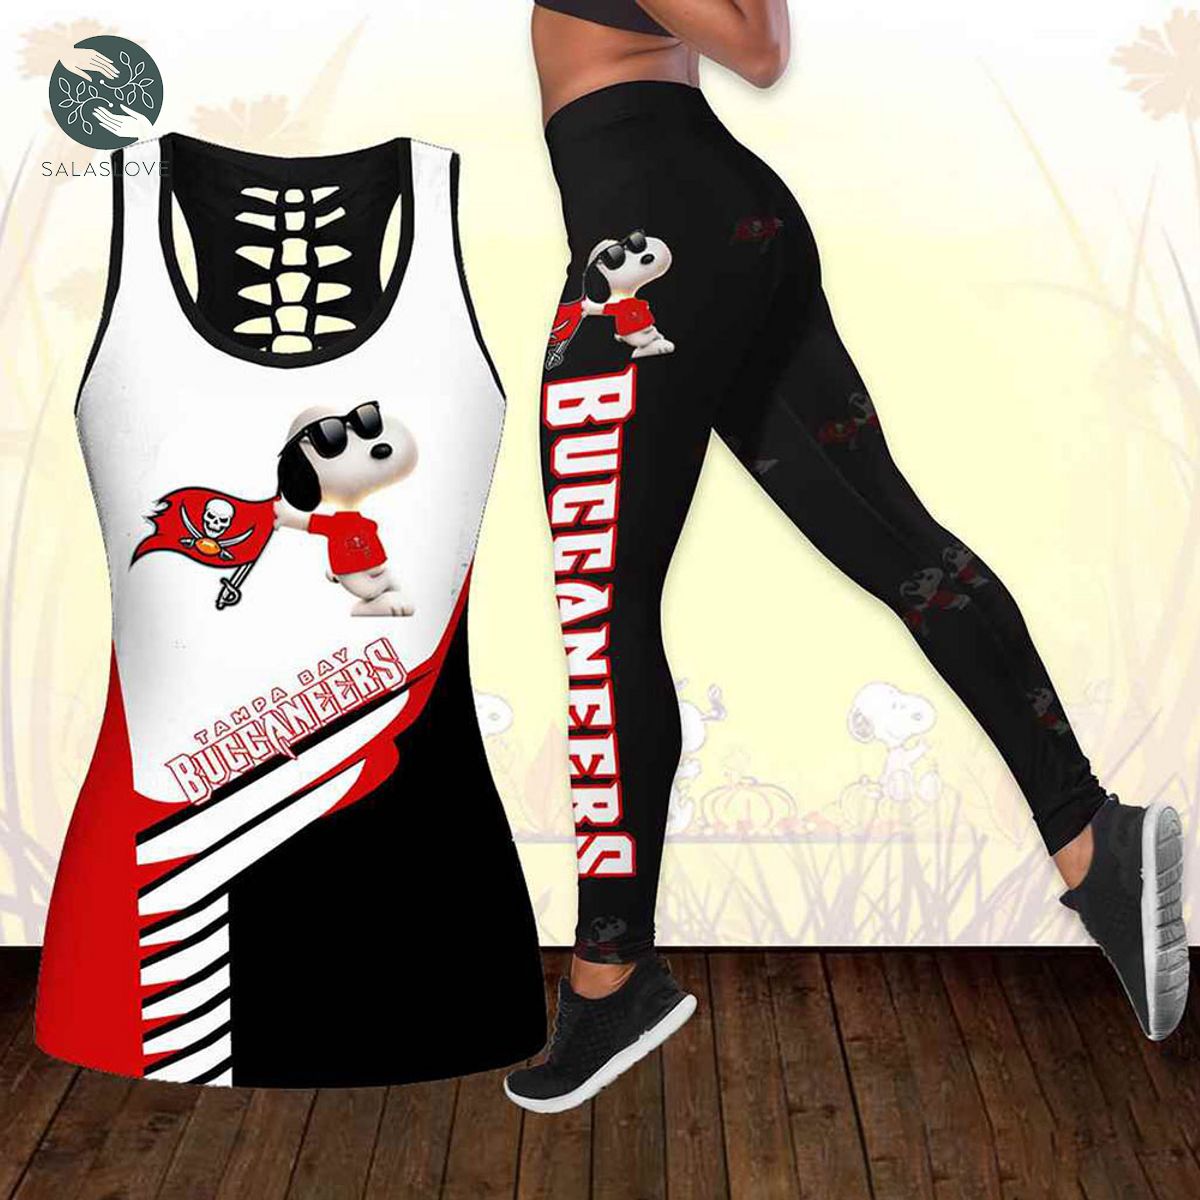 Tampa Bay Buccaneers Snoopy Combo Tank Top And Leggings



